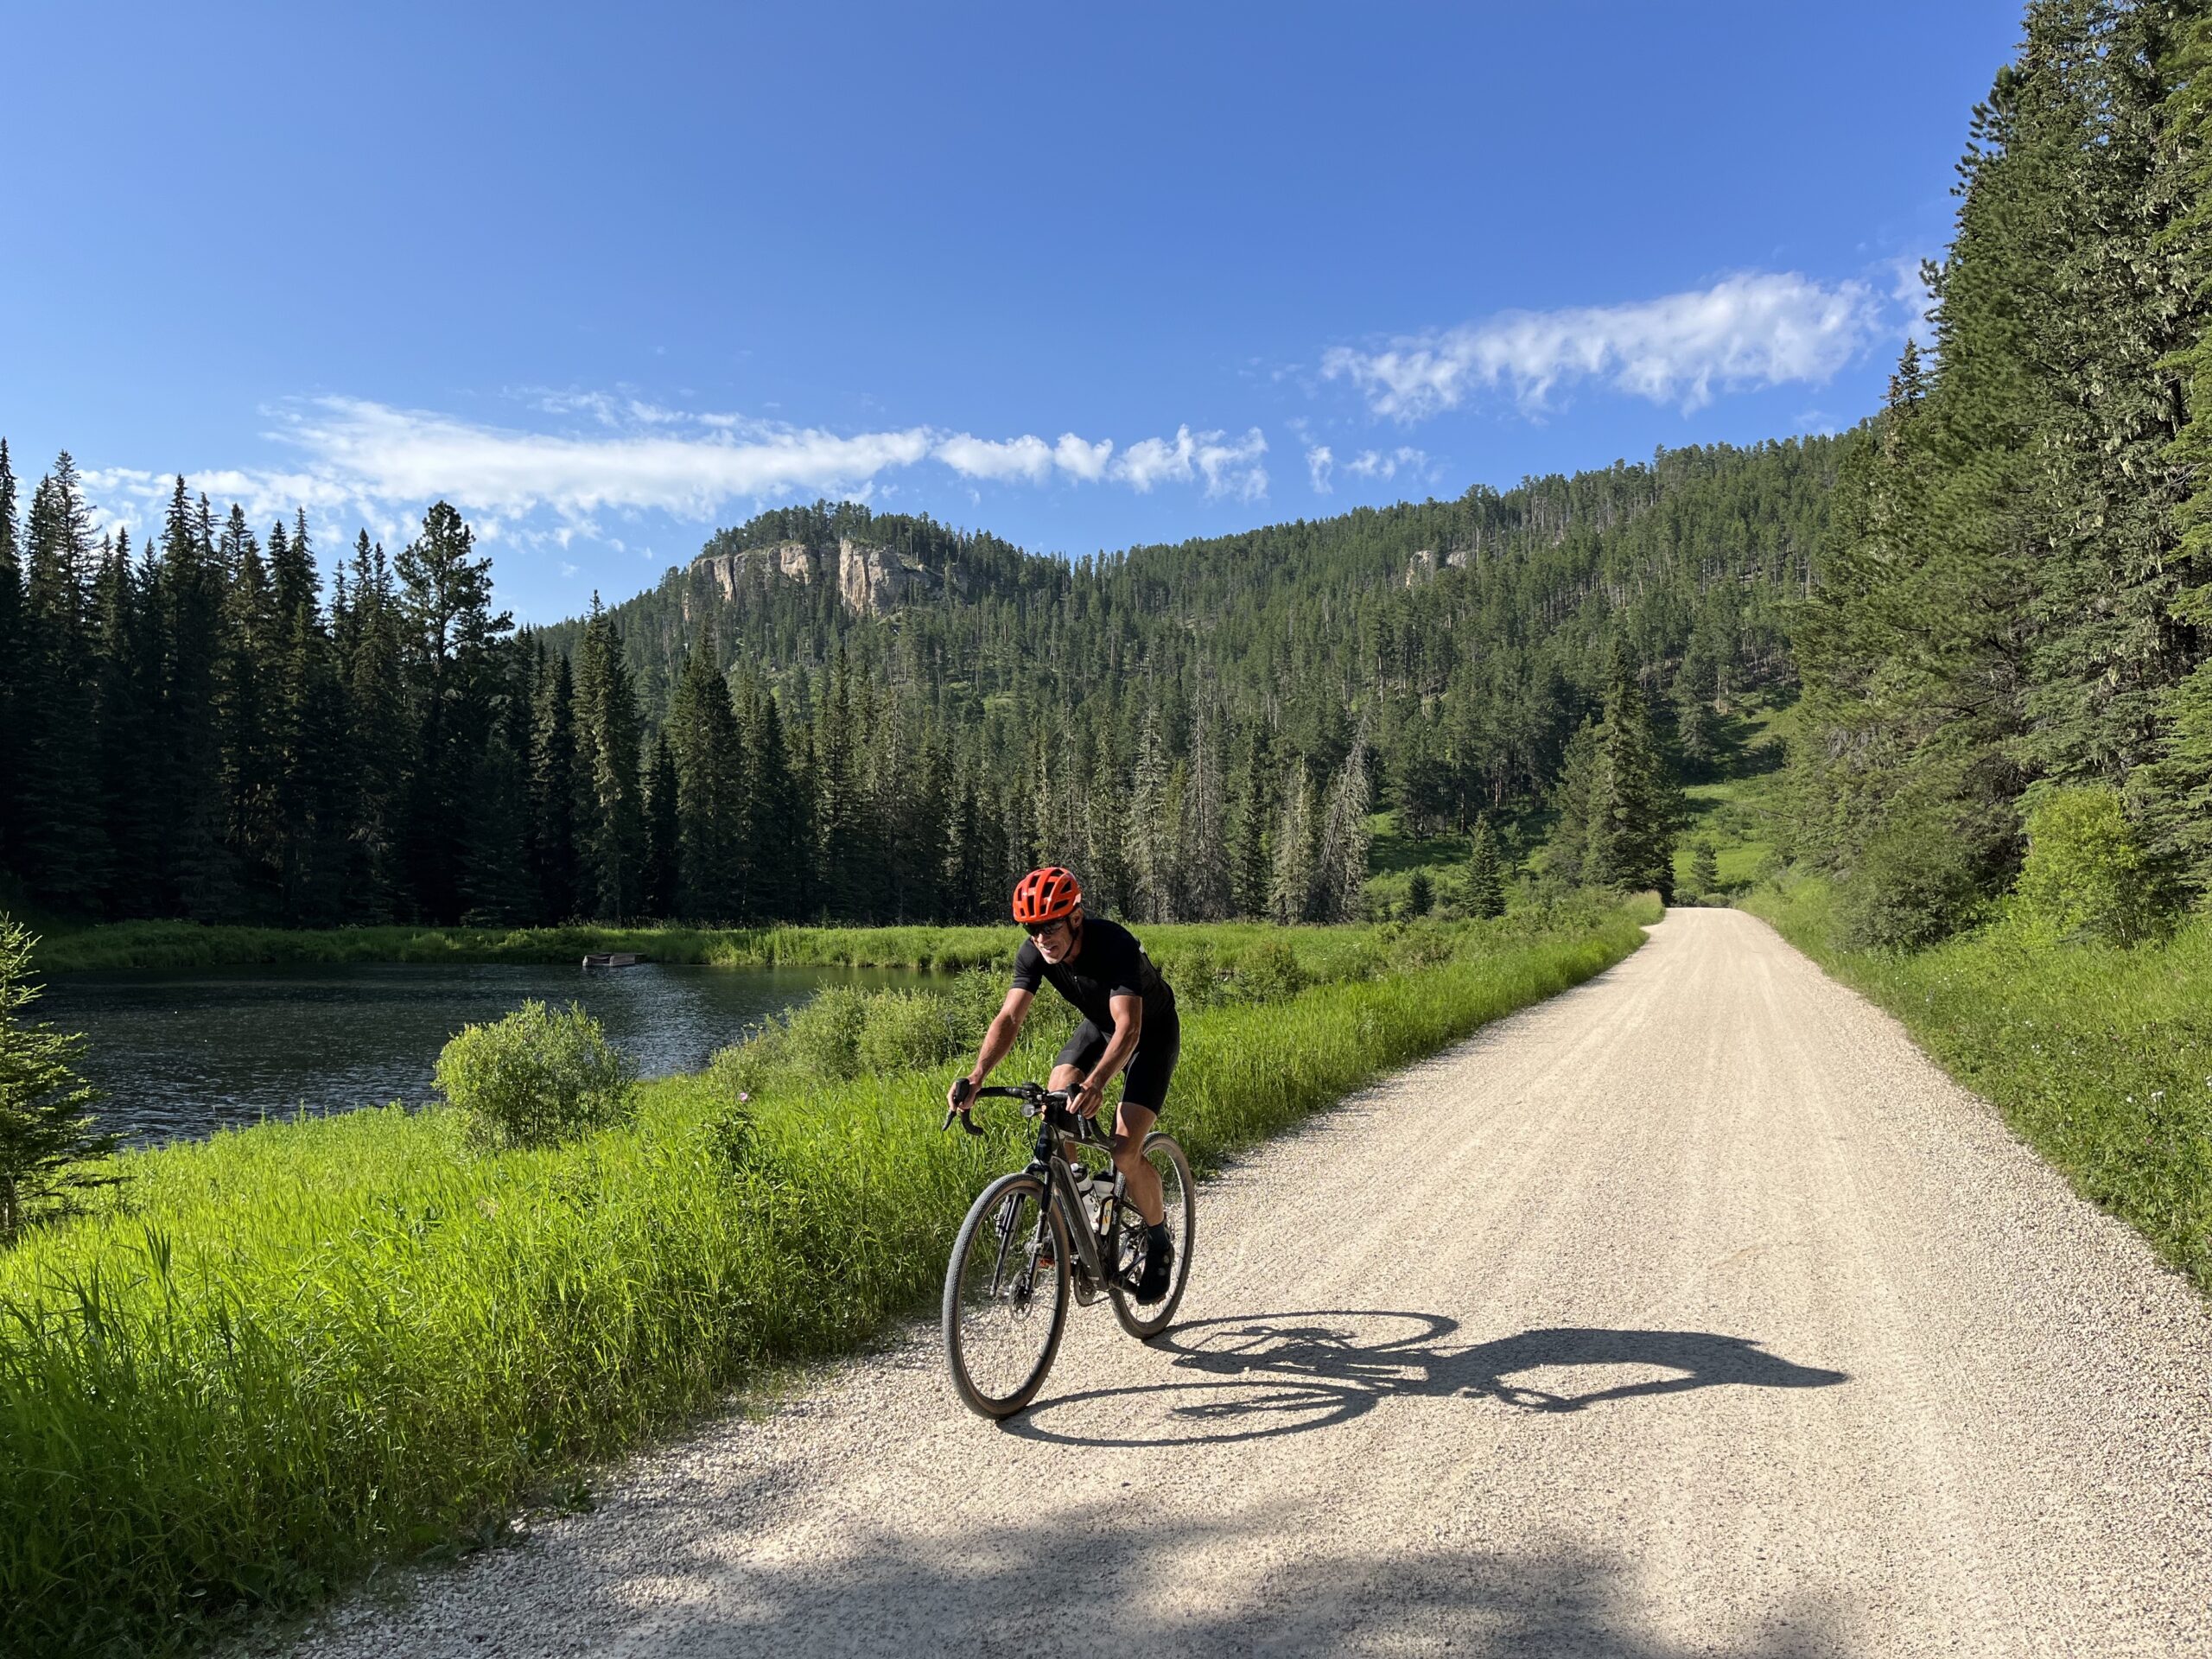 Cyclist on dirt road riding past a lake and mountain